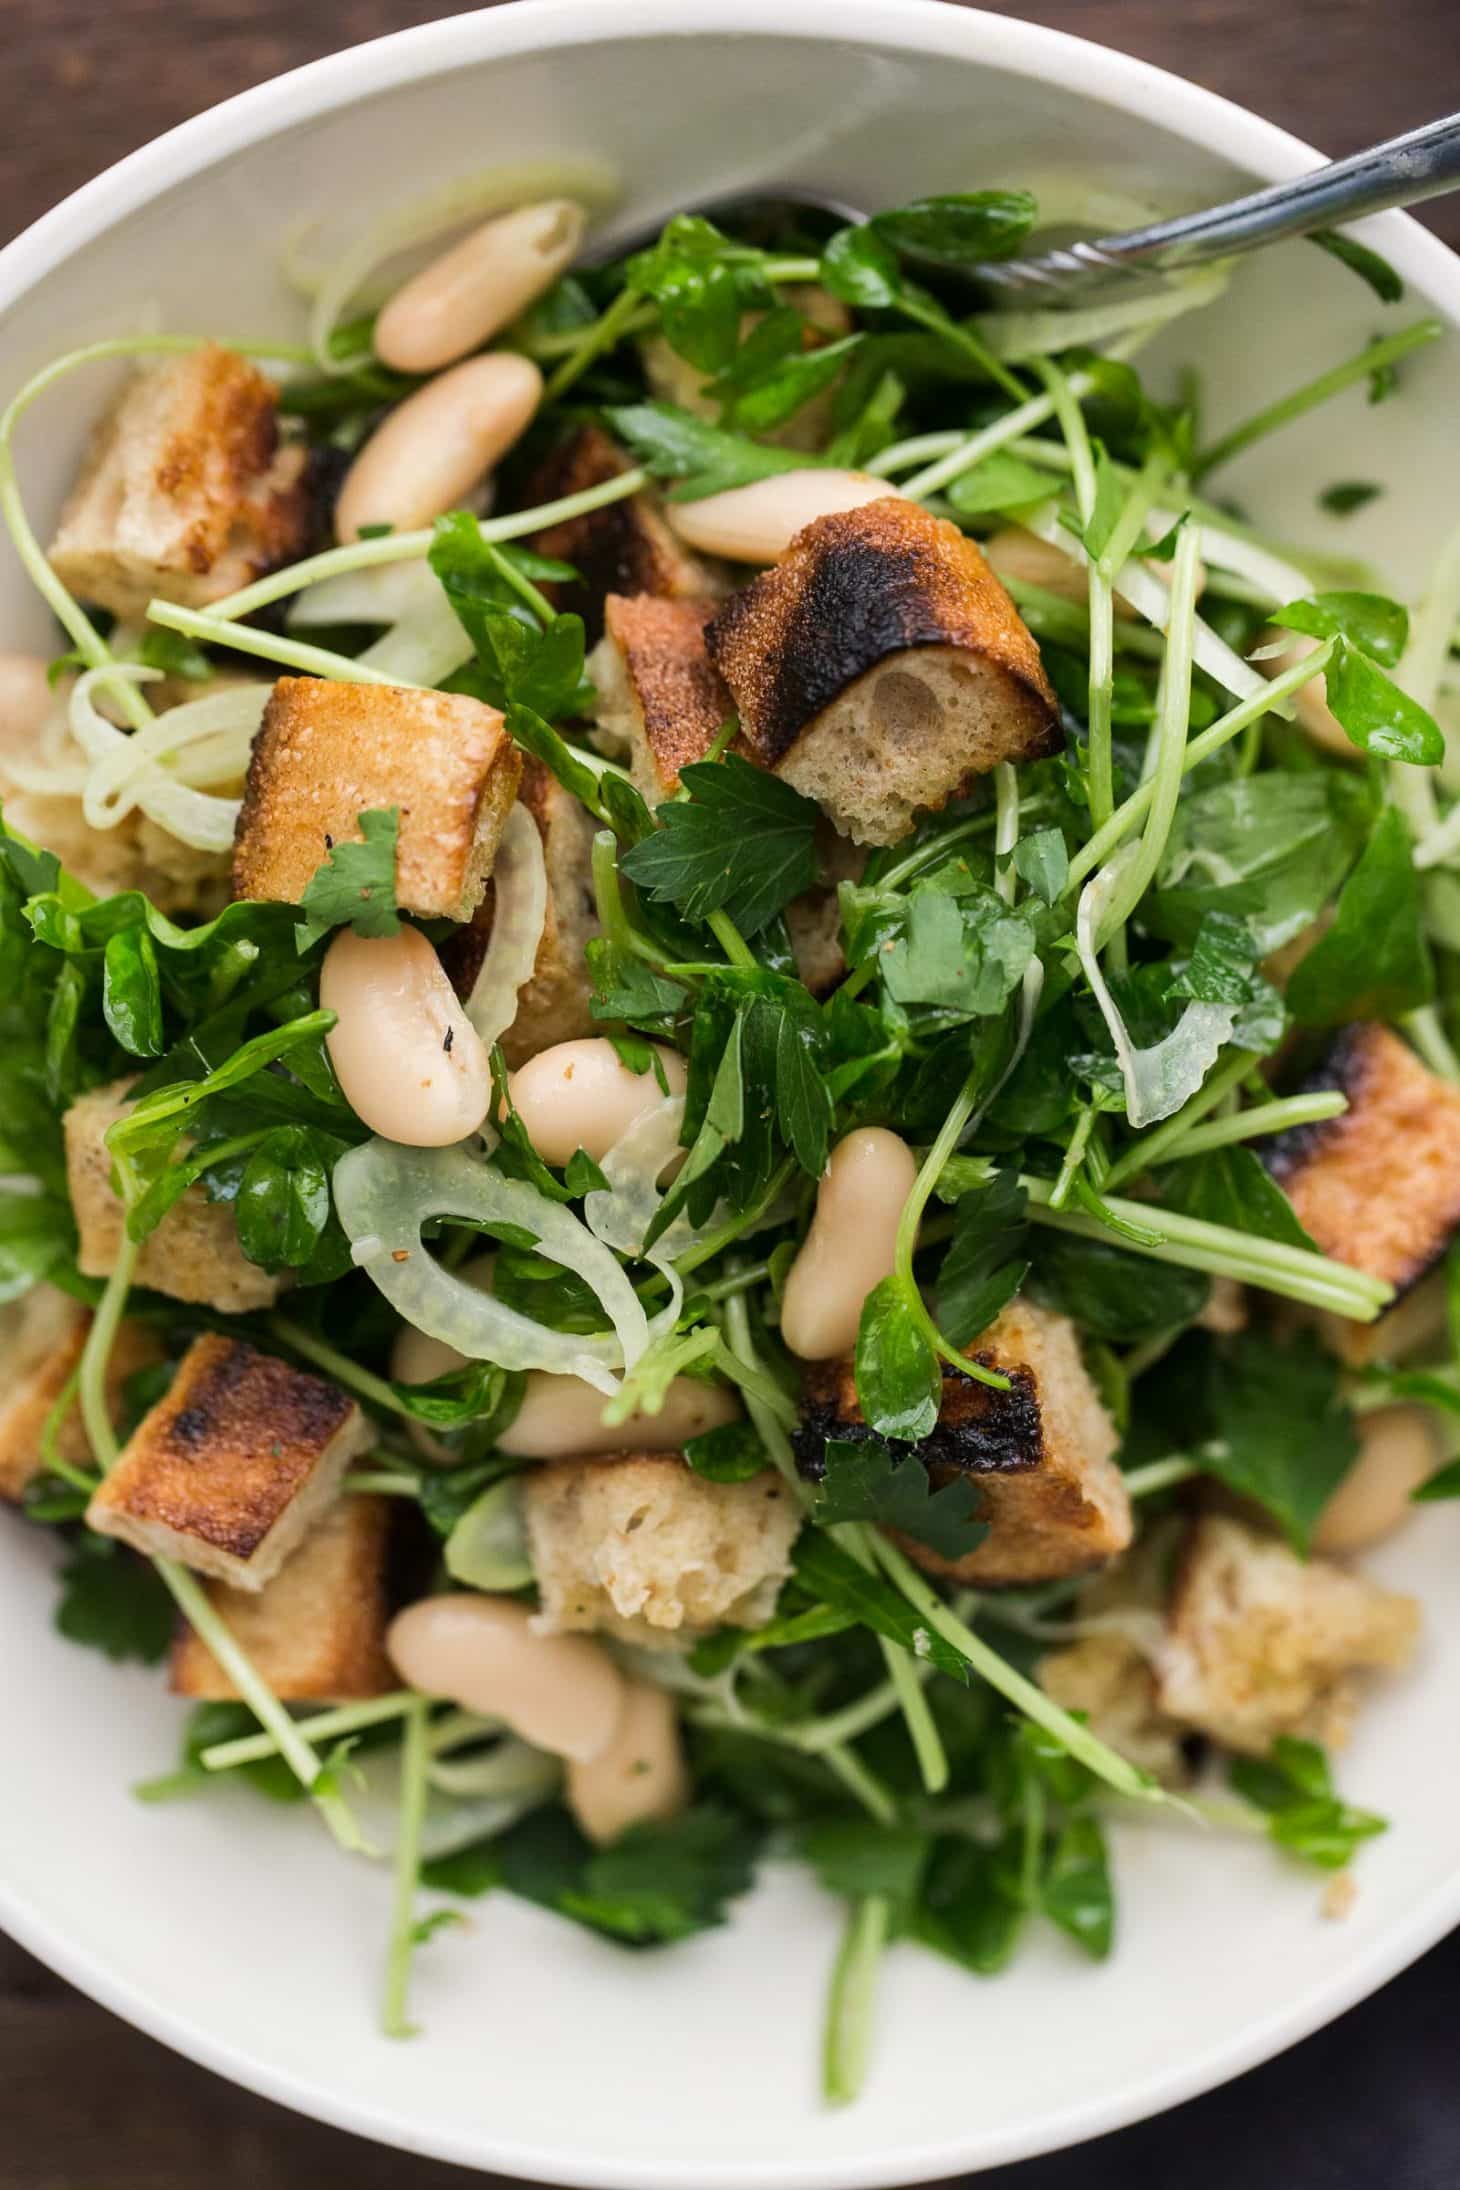 White Bean Salad with Pea Shoots and Grilled Bread